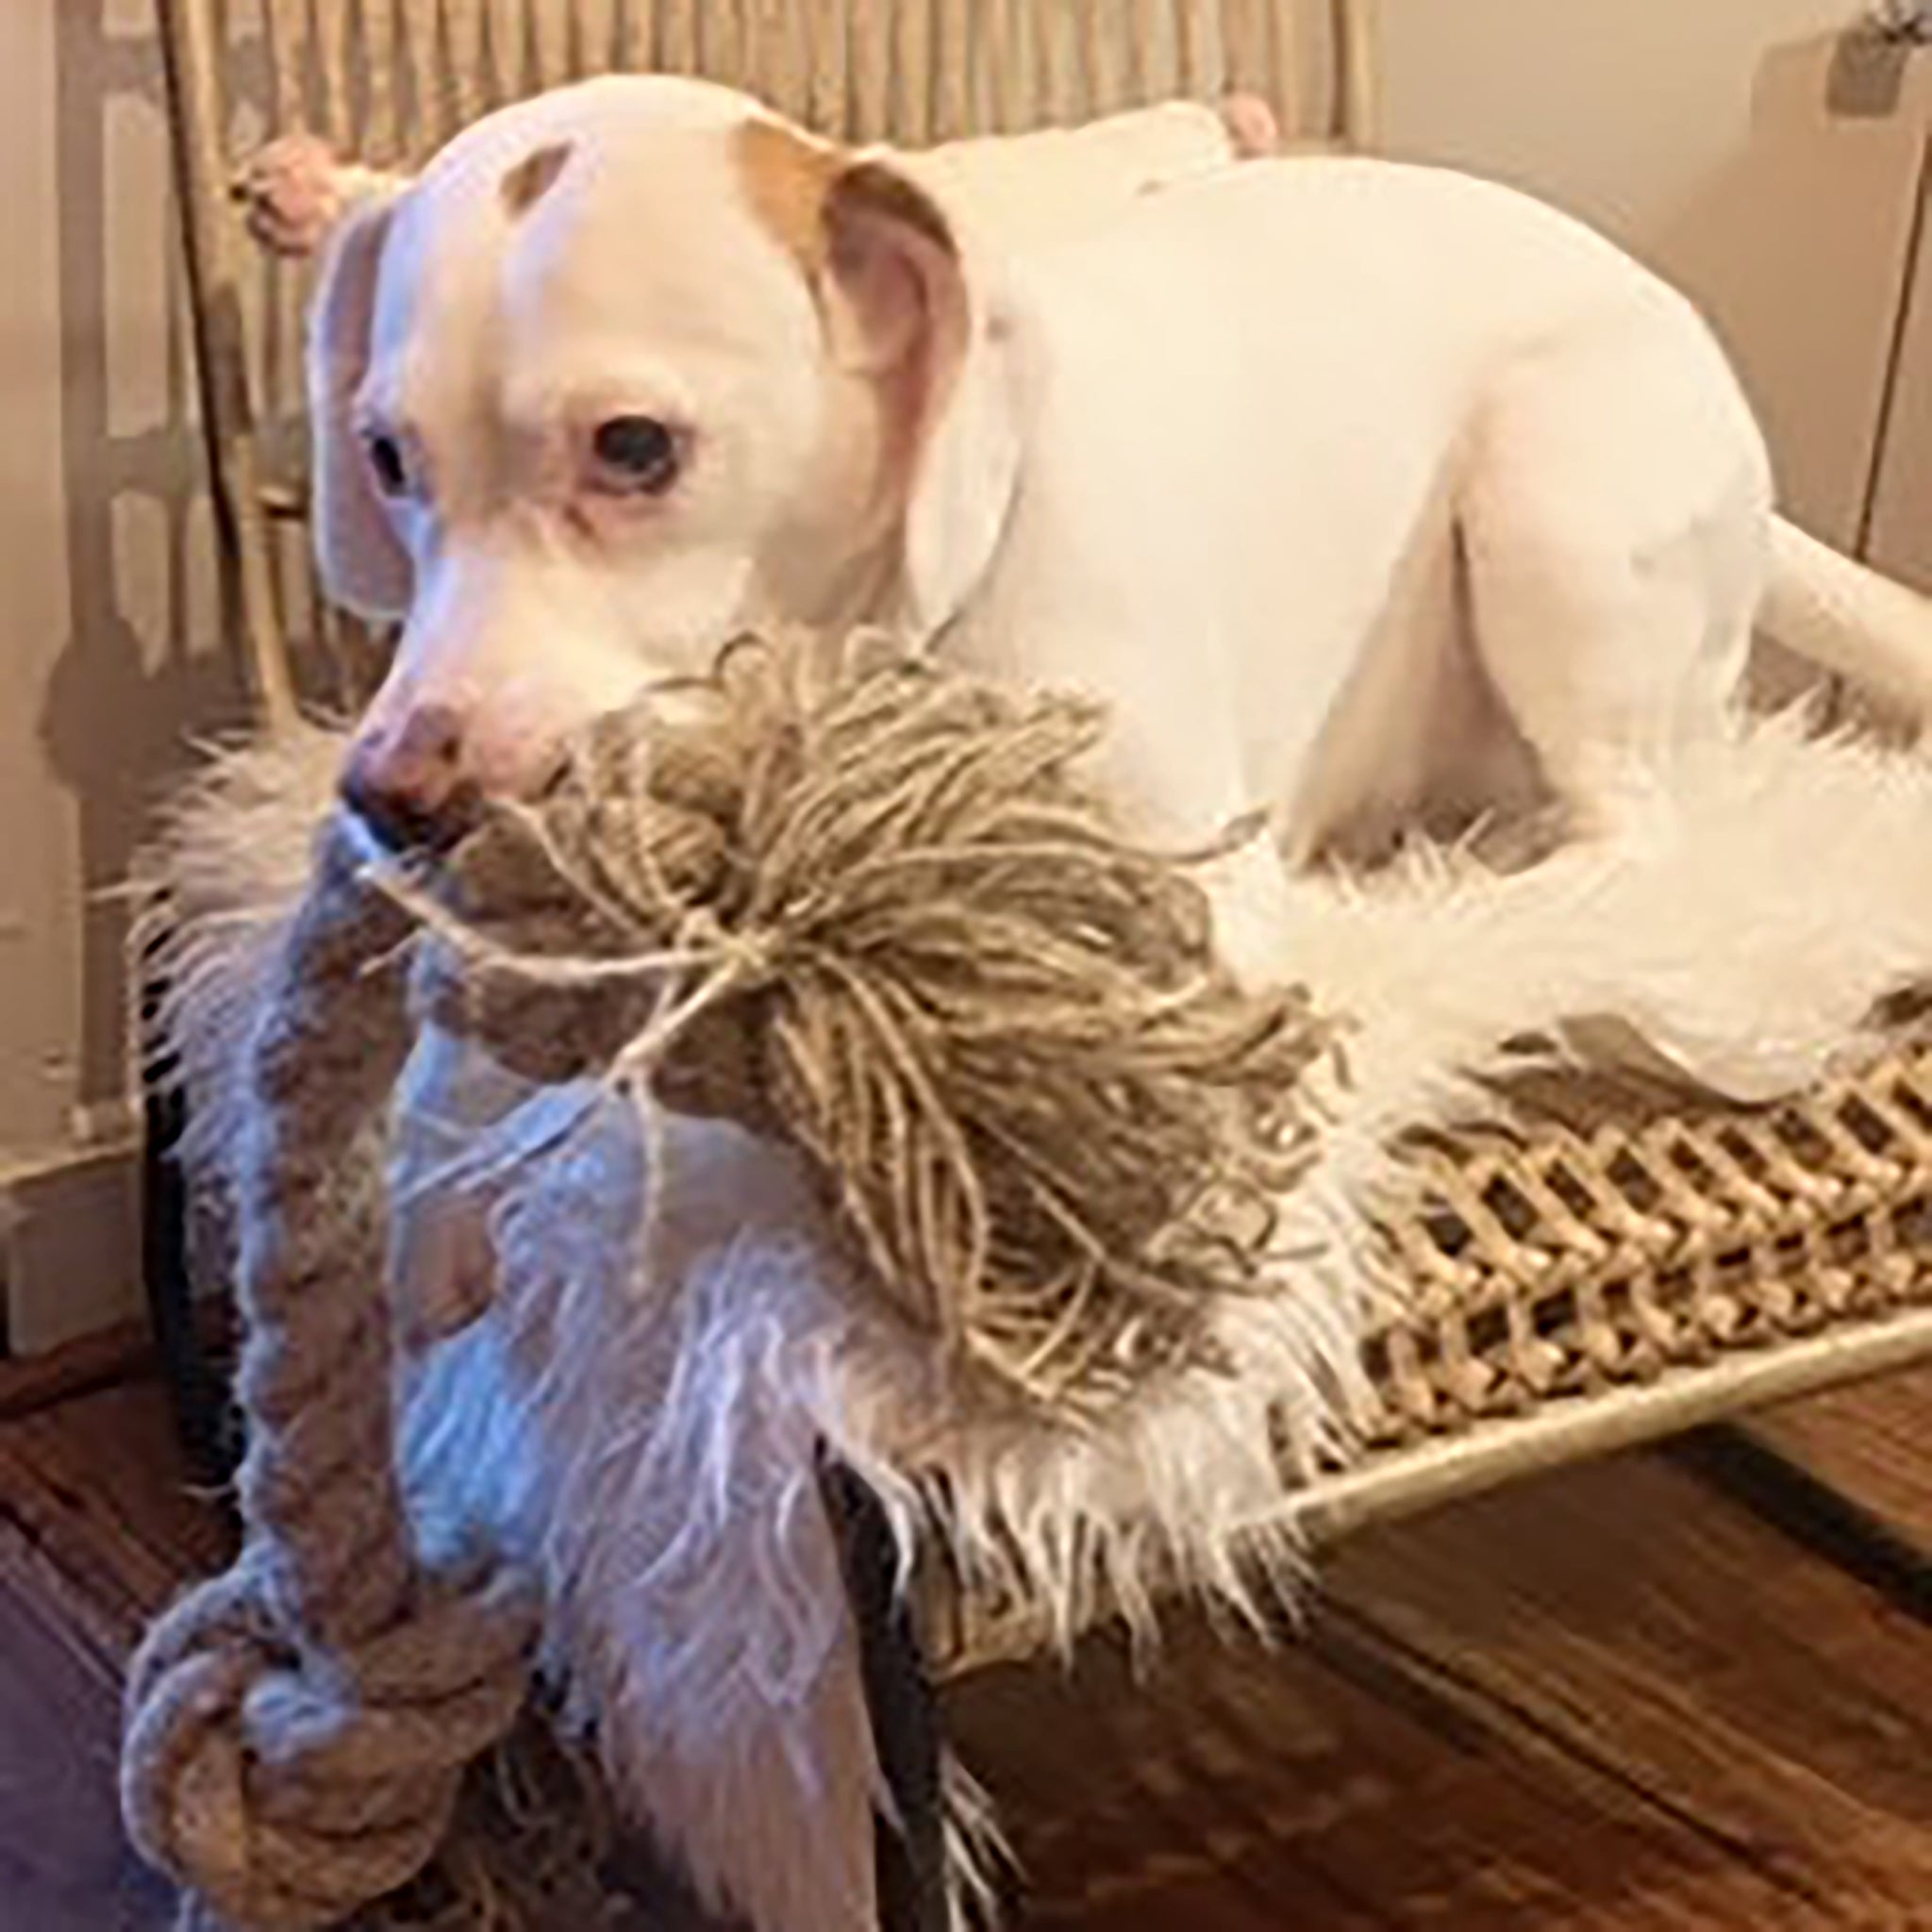 A large white dog holds a natural knotted rope dog toy in its mouth